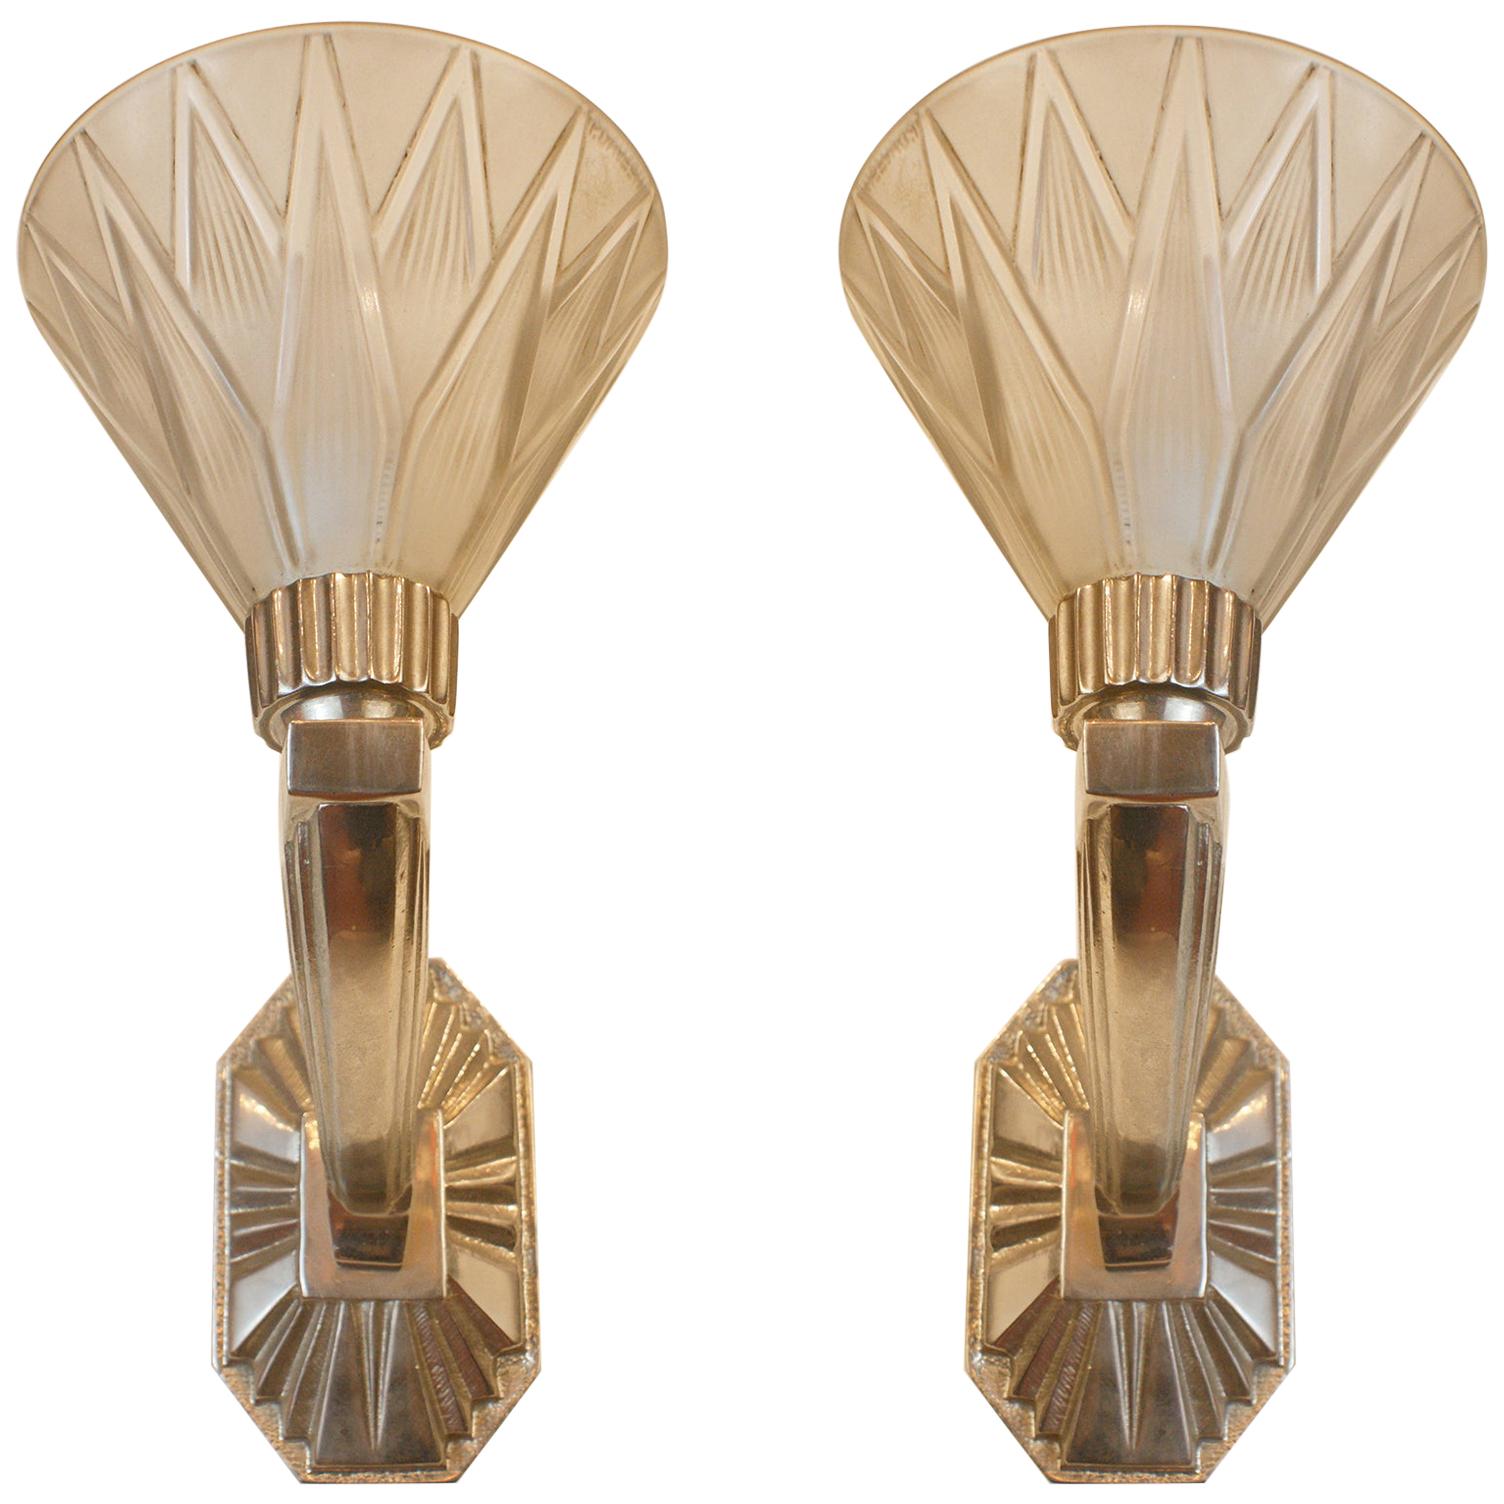 Charming Pair of Art Deco Wall Sconces signed P. D’avesn, France, circa 1930